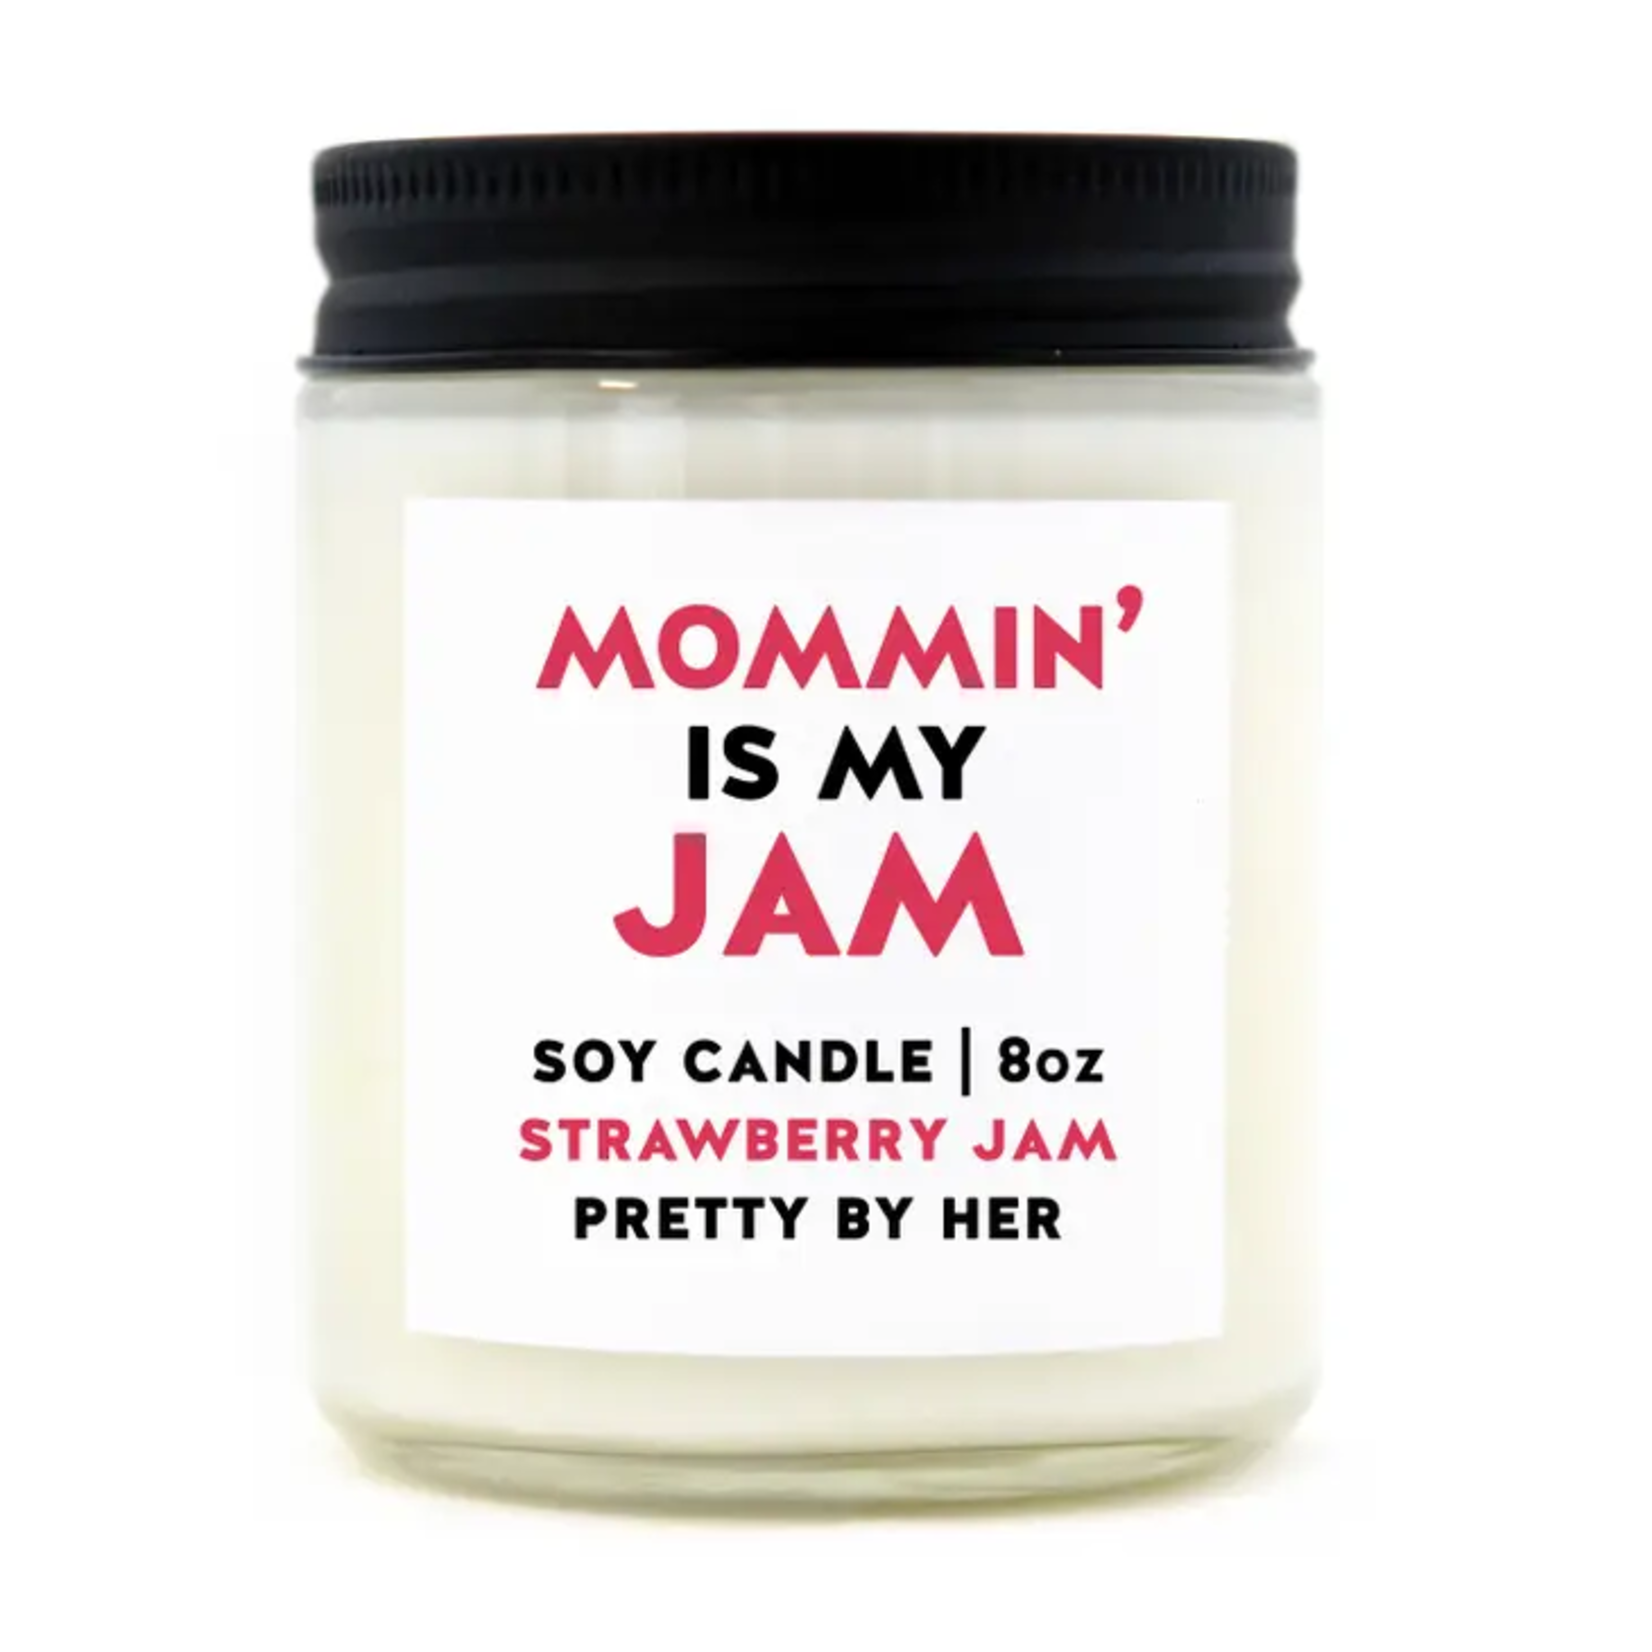 Soy Candle - Mommin' is my Jam